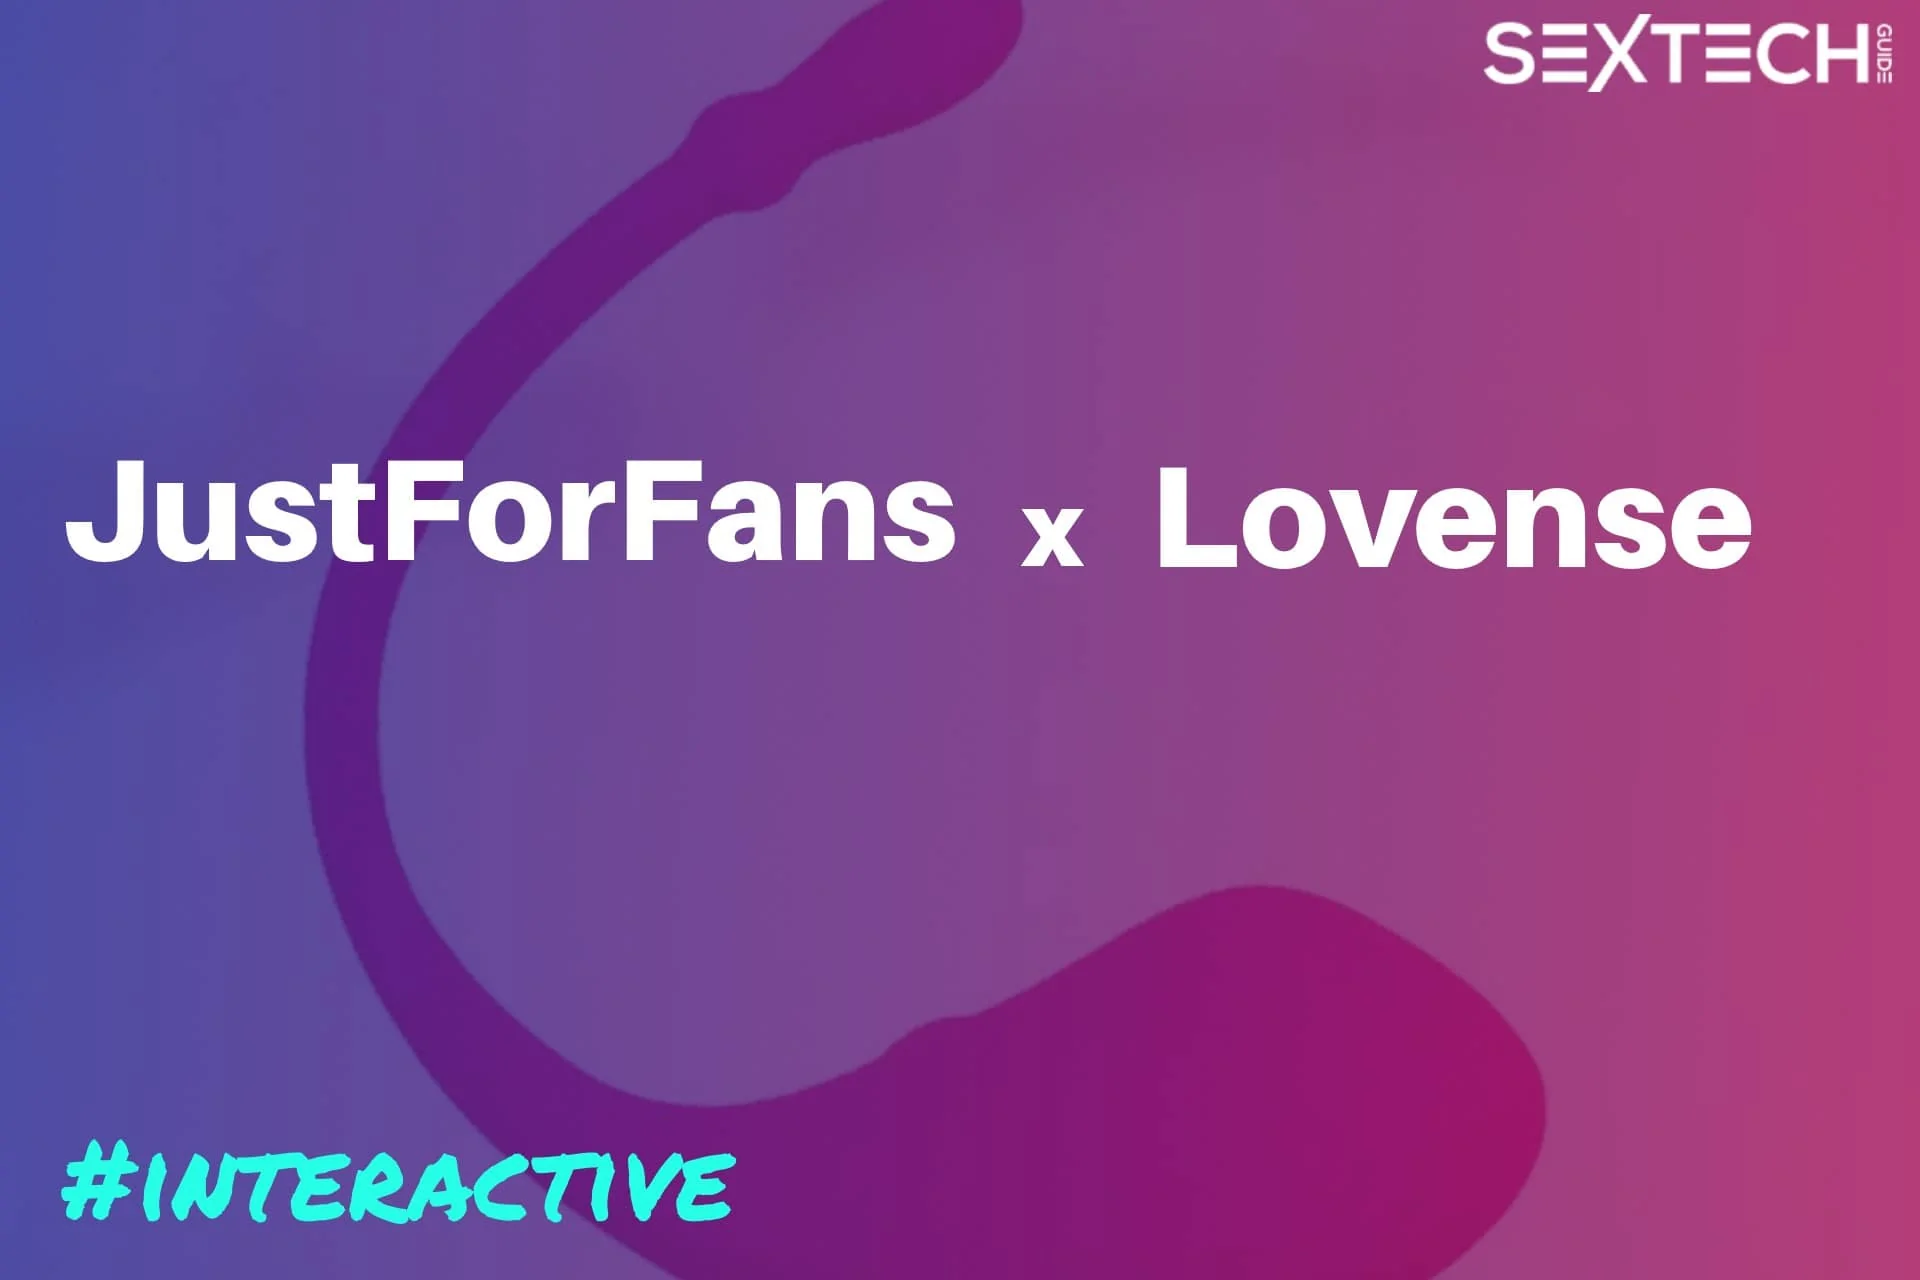 Just for Fans adds Lovense